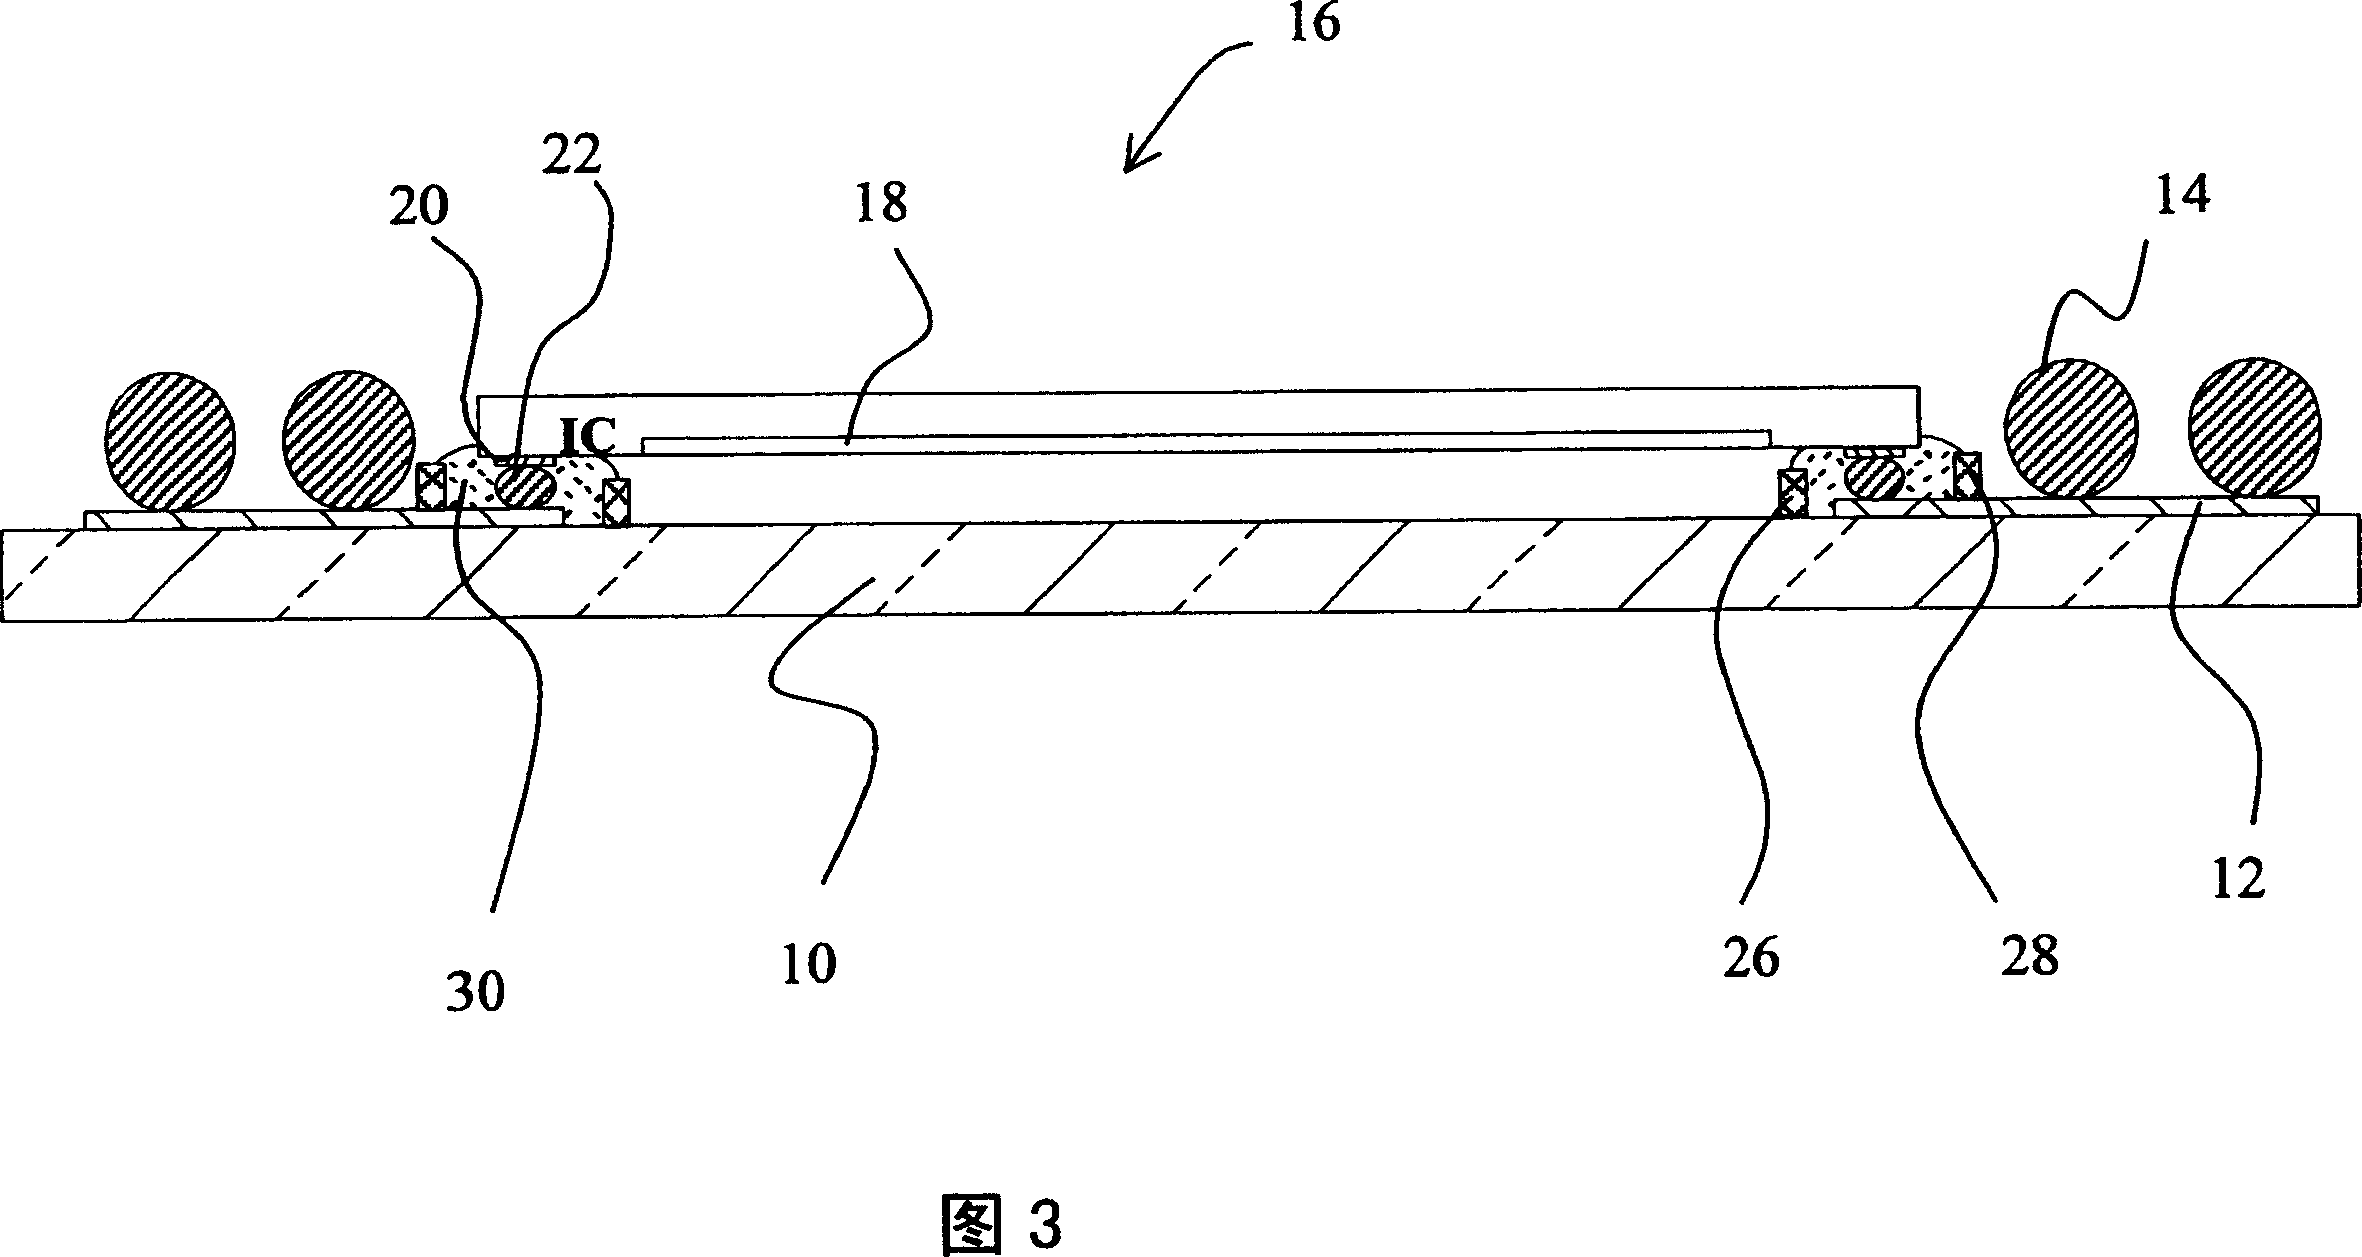 Encapsulation structure of optical sensor with gap wall